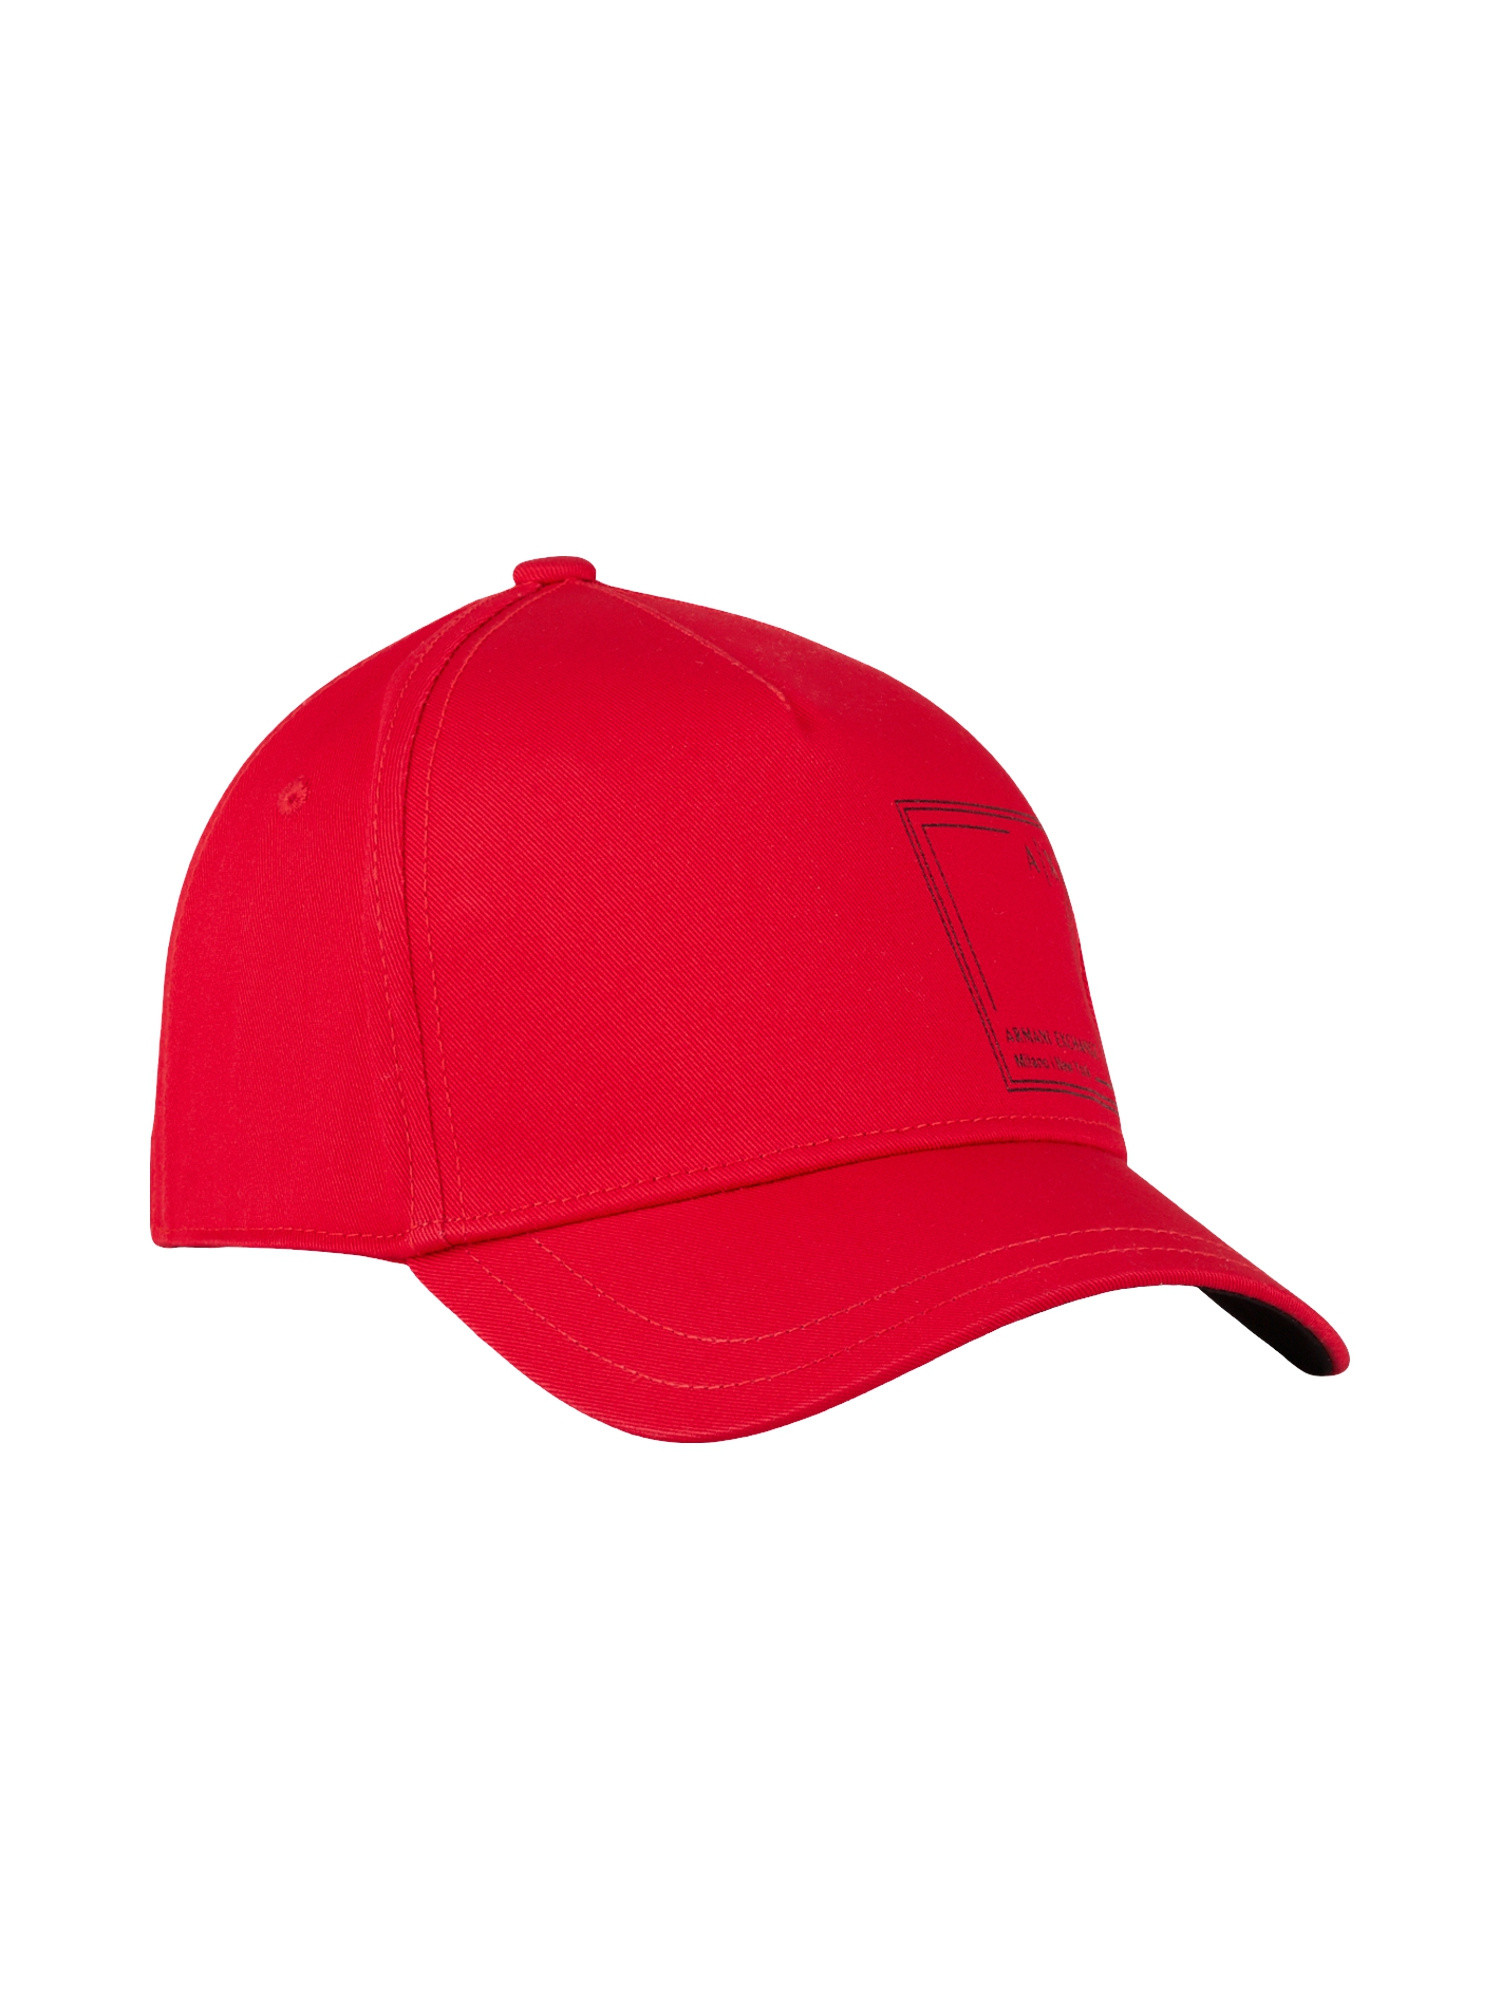 Armani Exchange - Cappello Baseball in cotone con stampa, Rosso, large image number 0